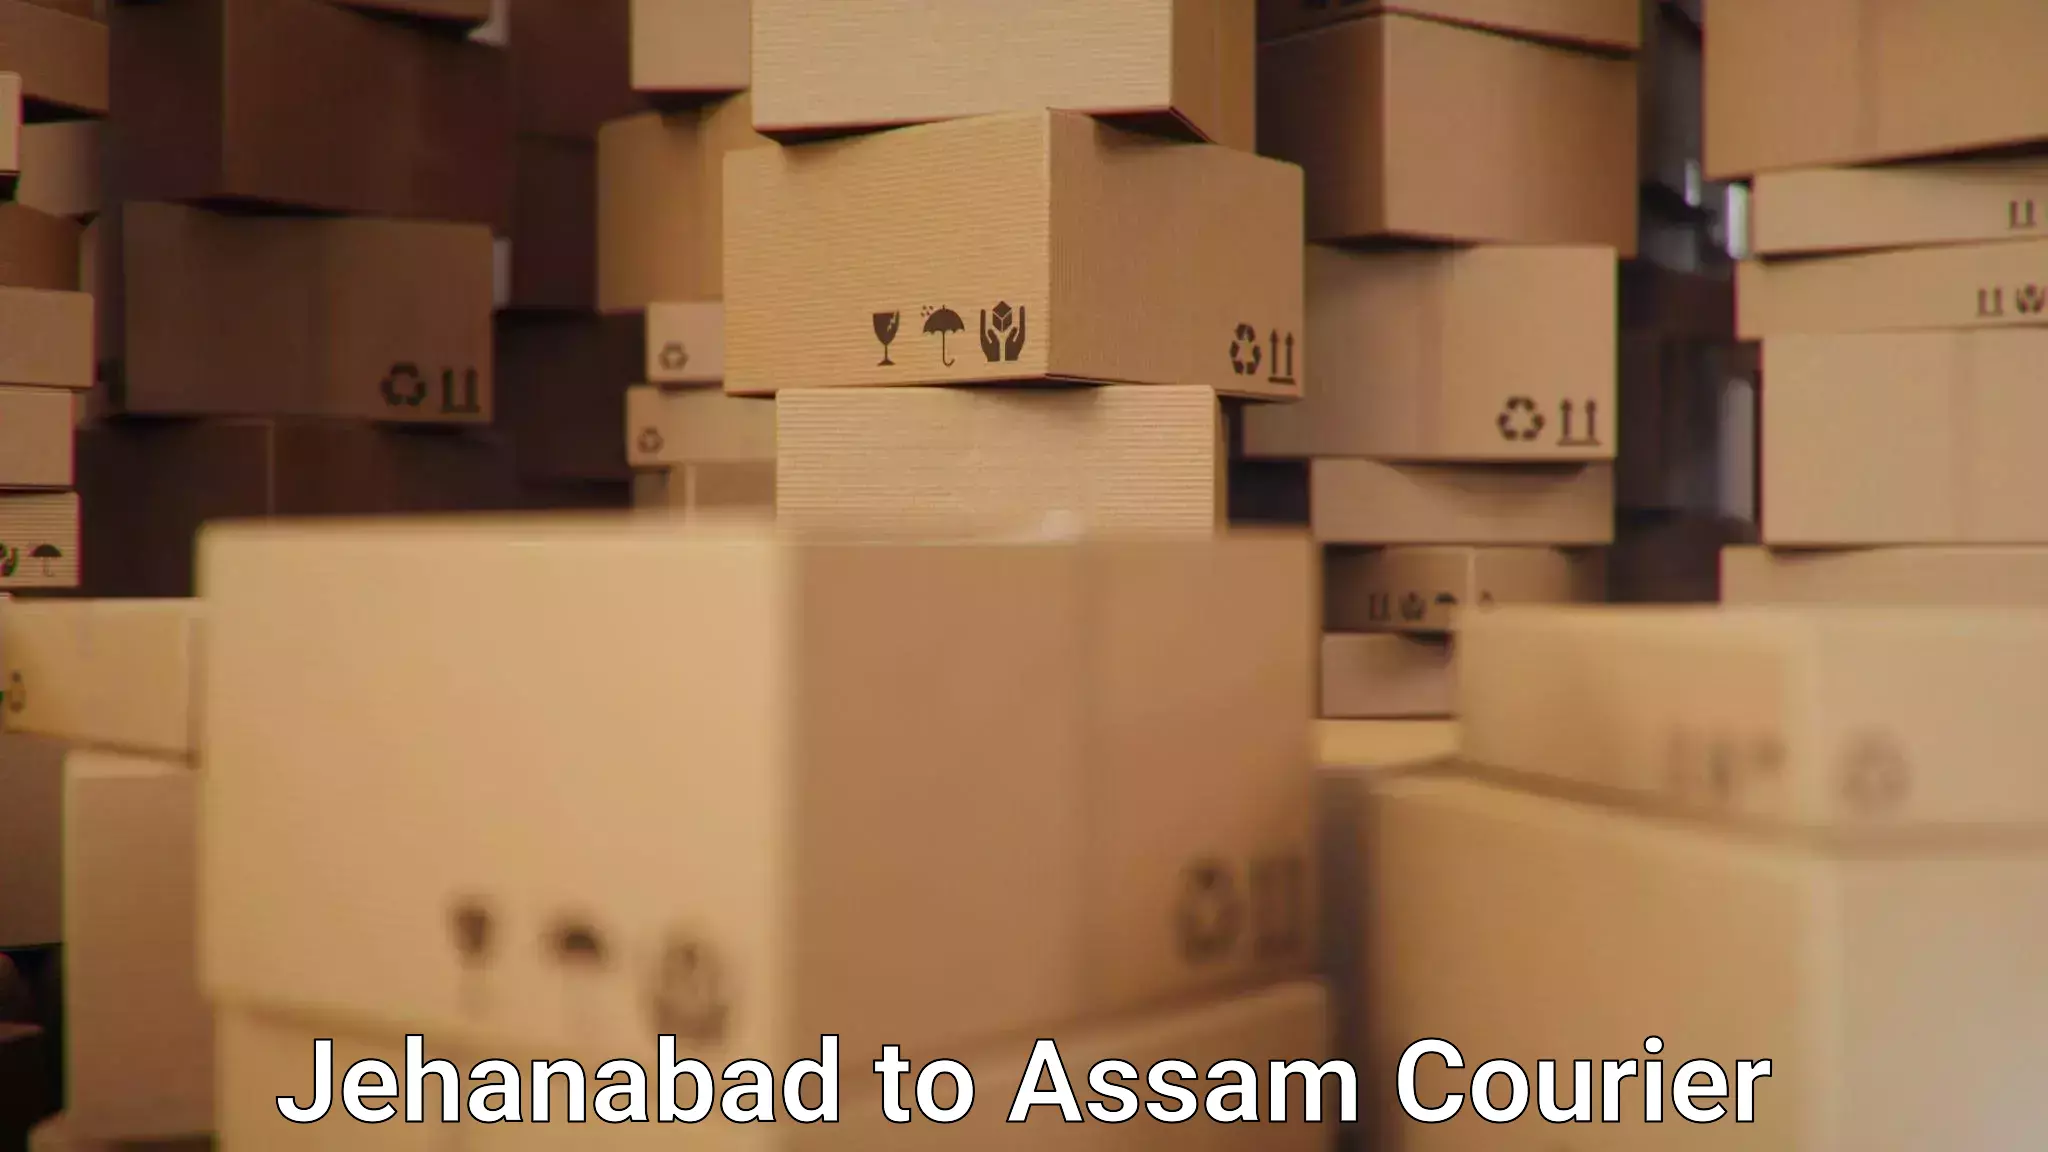 Courier service partnerships Jehanabad to Assam